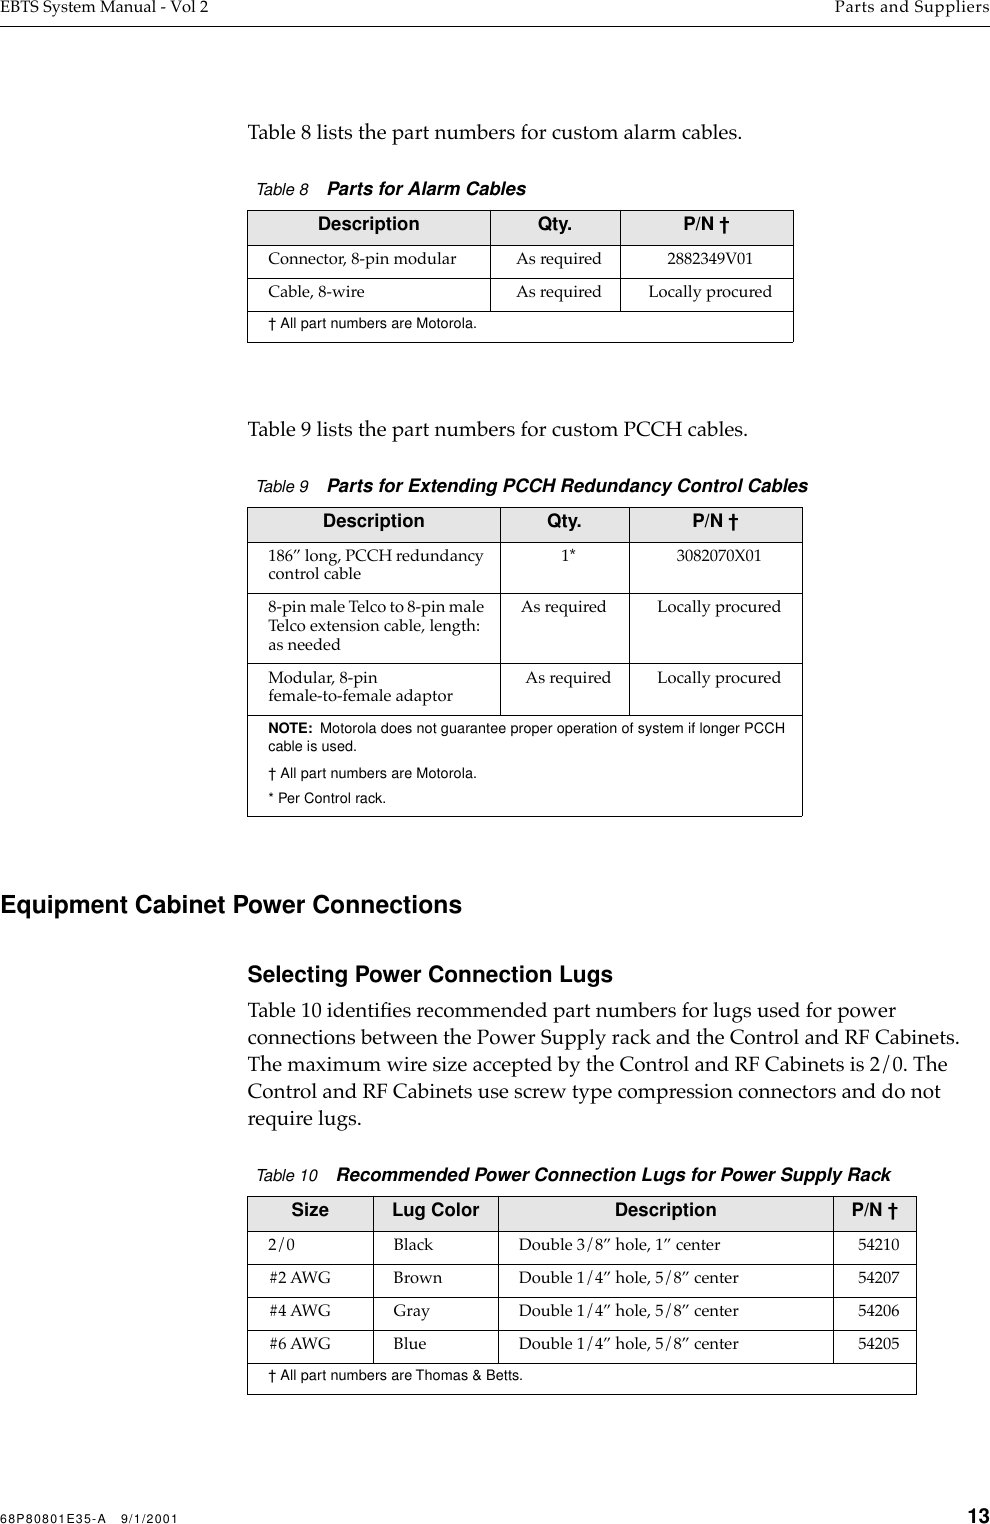 68P80801E35-A   9/1/2001 13EBTS System Manual - Vol 2 Parts and Suppliers Table 8 lists the part numbers for custom alarm cables.Table 9 lists the part numbers for custom PCCH cables.Equipment Cabinet Power ConnectionsSelecting Power Connection LugsTable 10 identiﬁes recommended part numbers for lugs used for power connections between the Power Supply rack and the Control and RF Cabinets. The maximum wire size accepted by the Control and RF Cabinets is 2/0. The Control and RF Cabinets use screw type compression connectors and do not require lugs.Table 8    Parts for Alarm CablesDescription Qty. P/N †Connector, 8-pin modular As required 2882349V01Cable, 8-wire As required Locally procured† All part numbers are Motorola.Table 9    Parts for Extending PCCH Redundancy Control CablesDescription Qty. P/N †186” long, PCCH redundancy control cable1* 3082070X018-pin male Telco to 8-pin male Telco extension cable, length: as neededAs required Locally procuredModular, 8-pin female-to-female adaptorAs required Locally procuredNOTE:  Motorola does not guarantee proper operation of system if longer PCCH cable is used.† All part numbers are Motorola.* Per Control rack.Table 10    Recommended Power Connection Lugs for Power Supply RackSize Lug Color Description P/N †2/0 Black Double 3/8” hole, 1” center 54210#2 AWG Brown Double 1/4” hole, 5/8” center 54207#4 AWG Gray Double 1/4” hole, 5/8” center 54206#6 AWG Blue Double 1/4” hole, 5/8” center 54205† All part numbers are Thomas &amp; Betts.